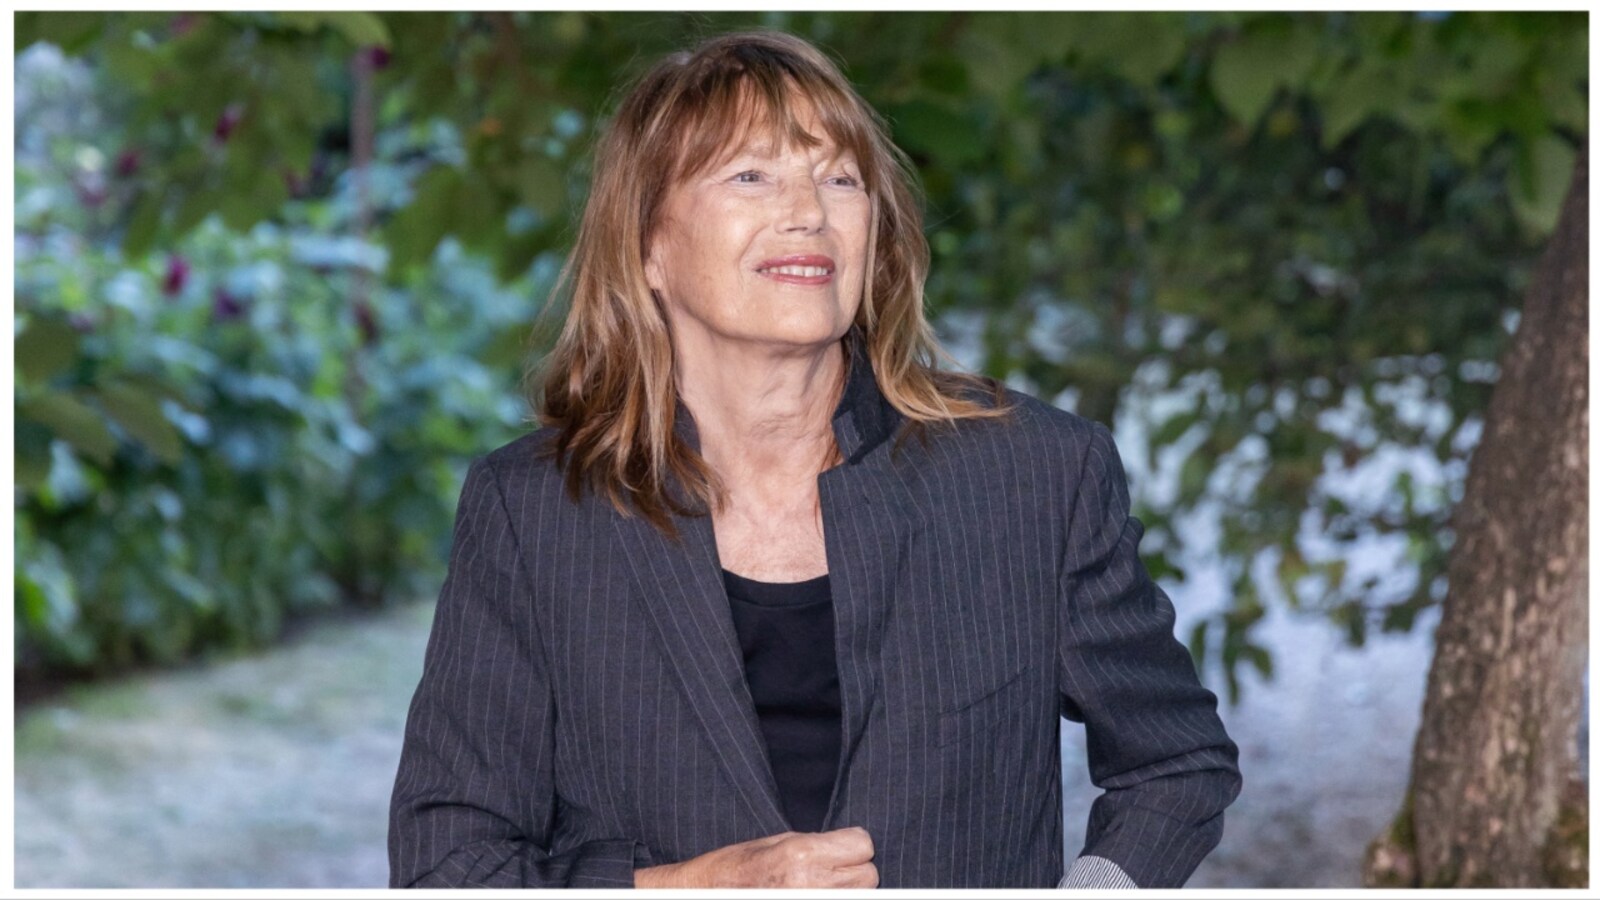 43 Times Jane Birkin was the Ultimate French Style Icon